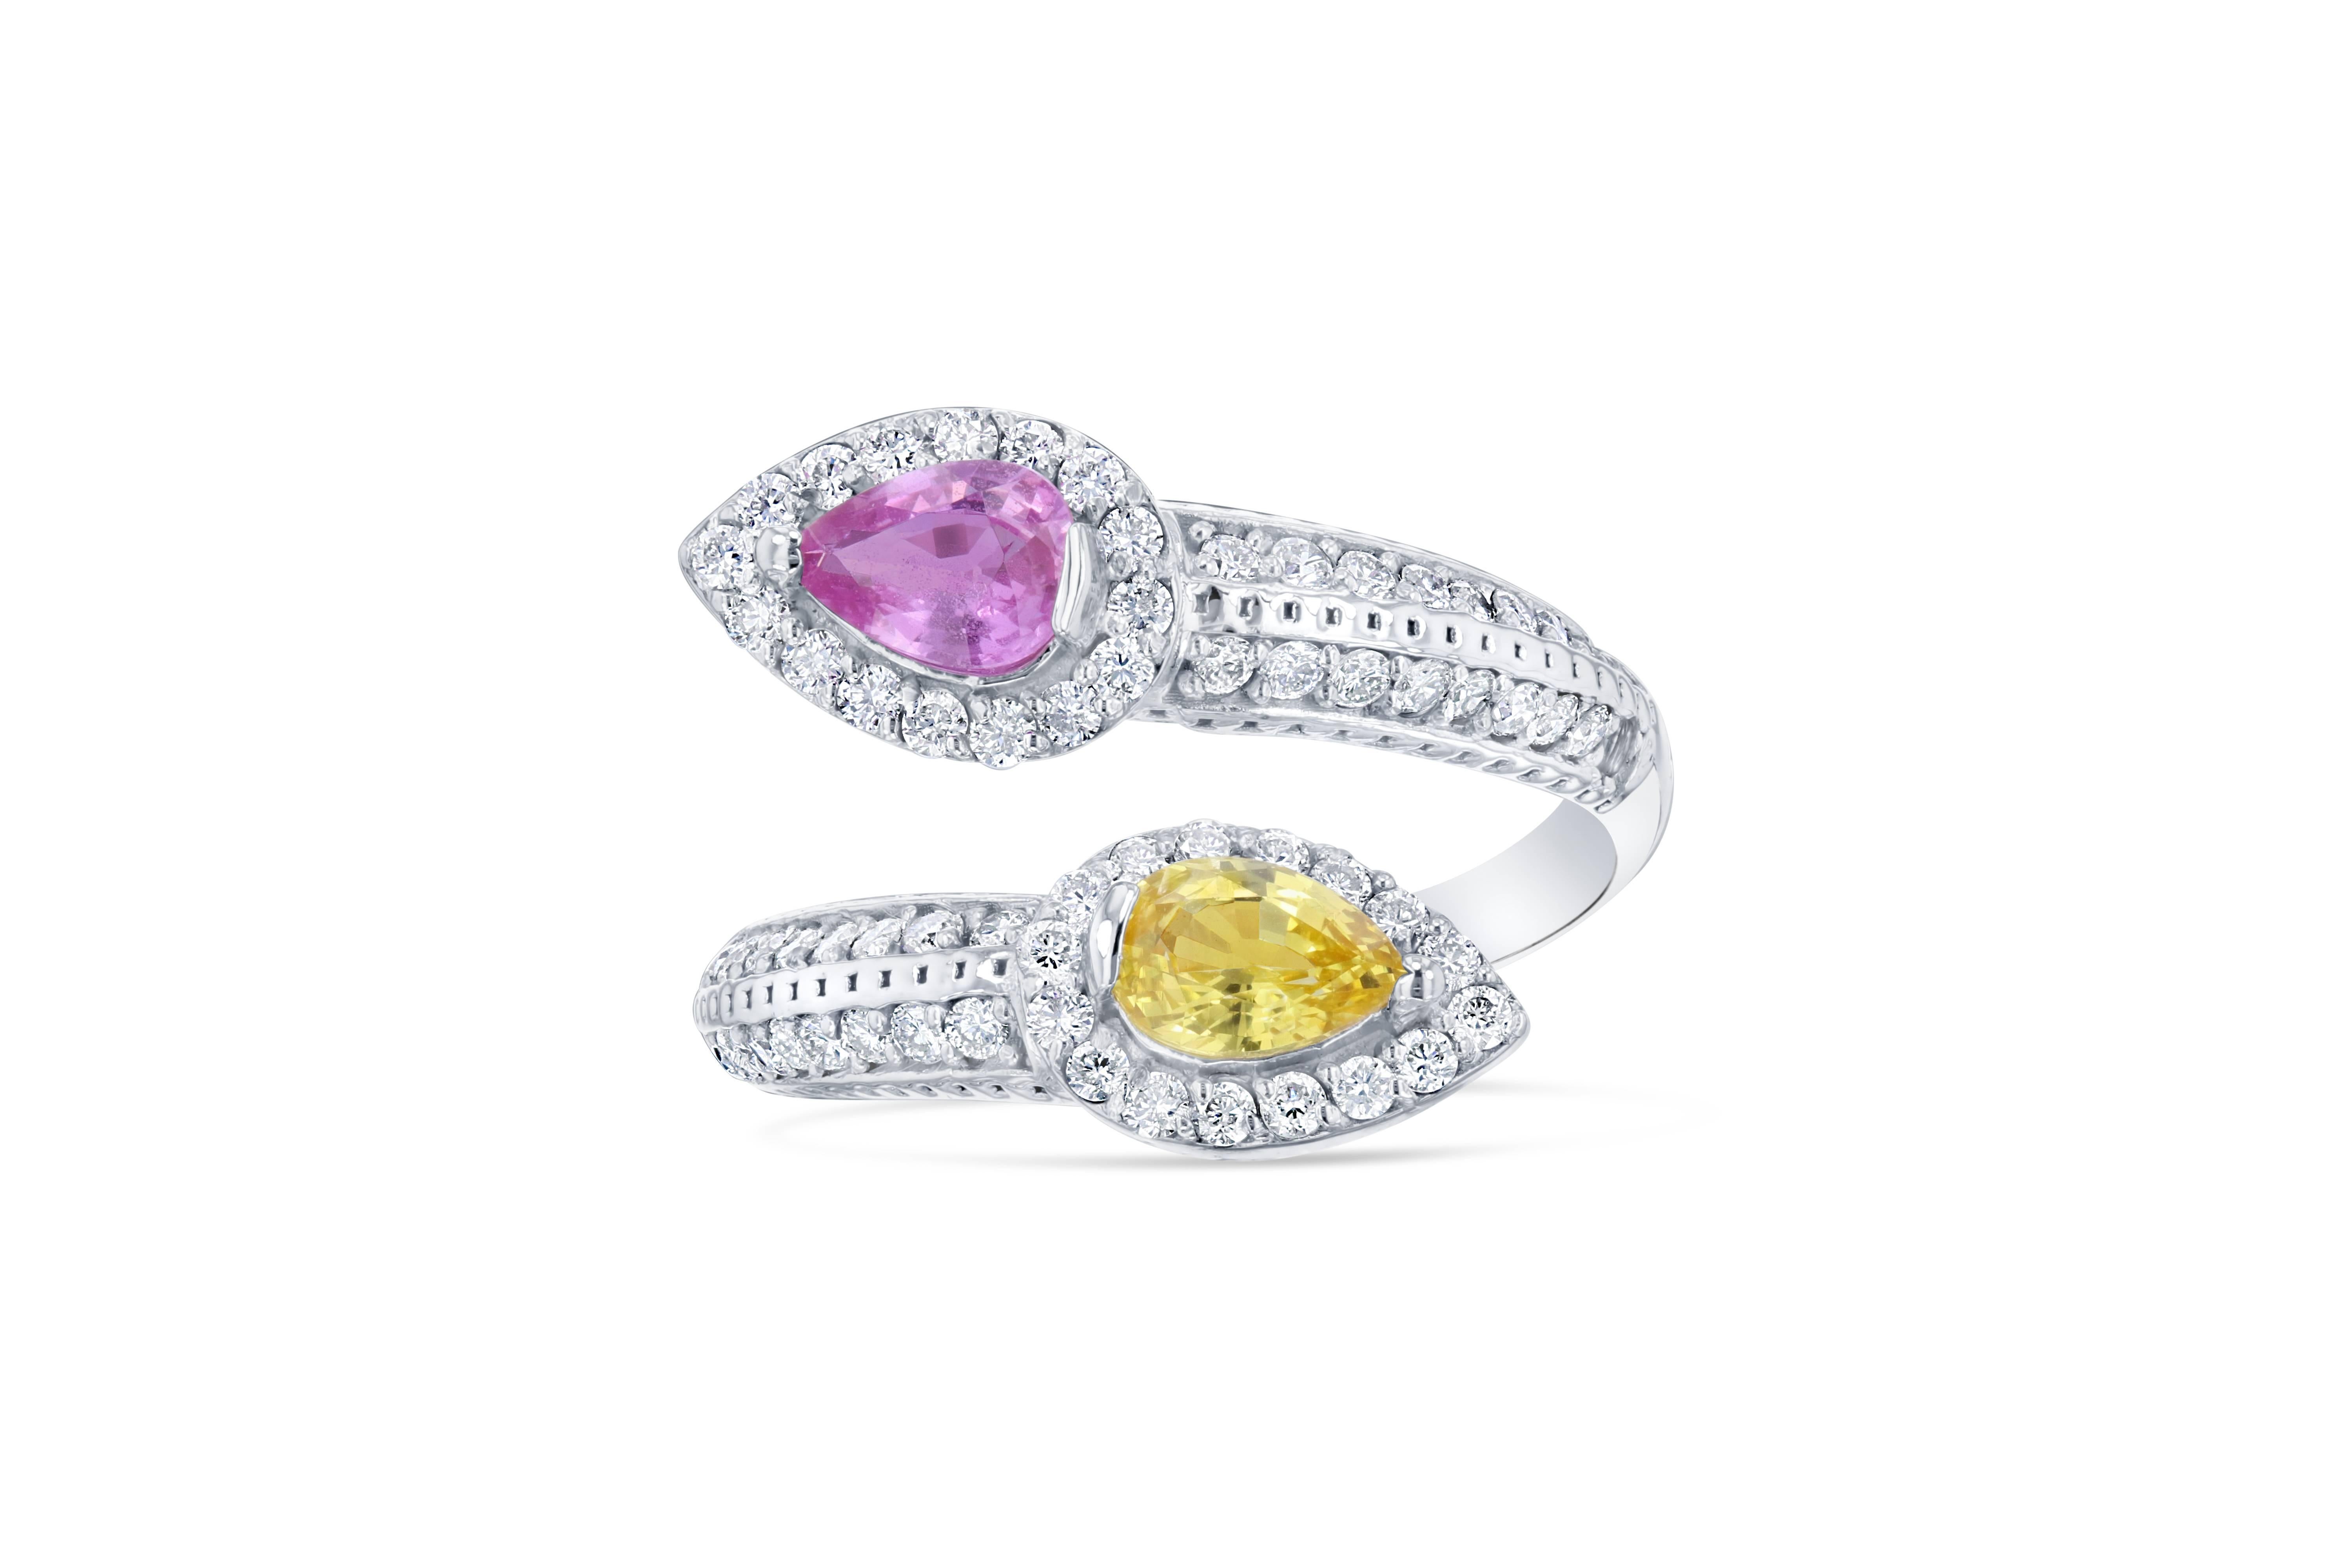 This ring has 2 Pear Cut Yellow and Pink Sapphires that weigh a total of  0.96 carats.  The ring is surrounded by 68 Round Cut Diamonds that weigh 0.60 carats. The Sapphires are natural and have been heat treated as per industry standards. 

This